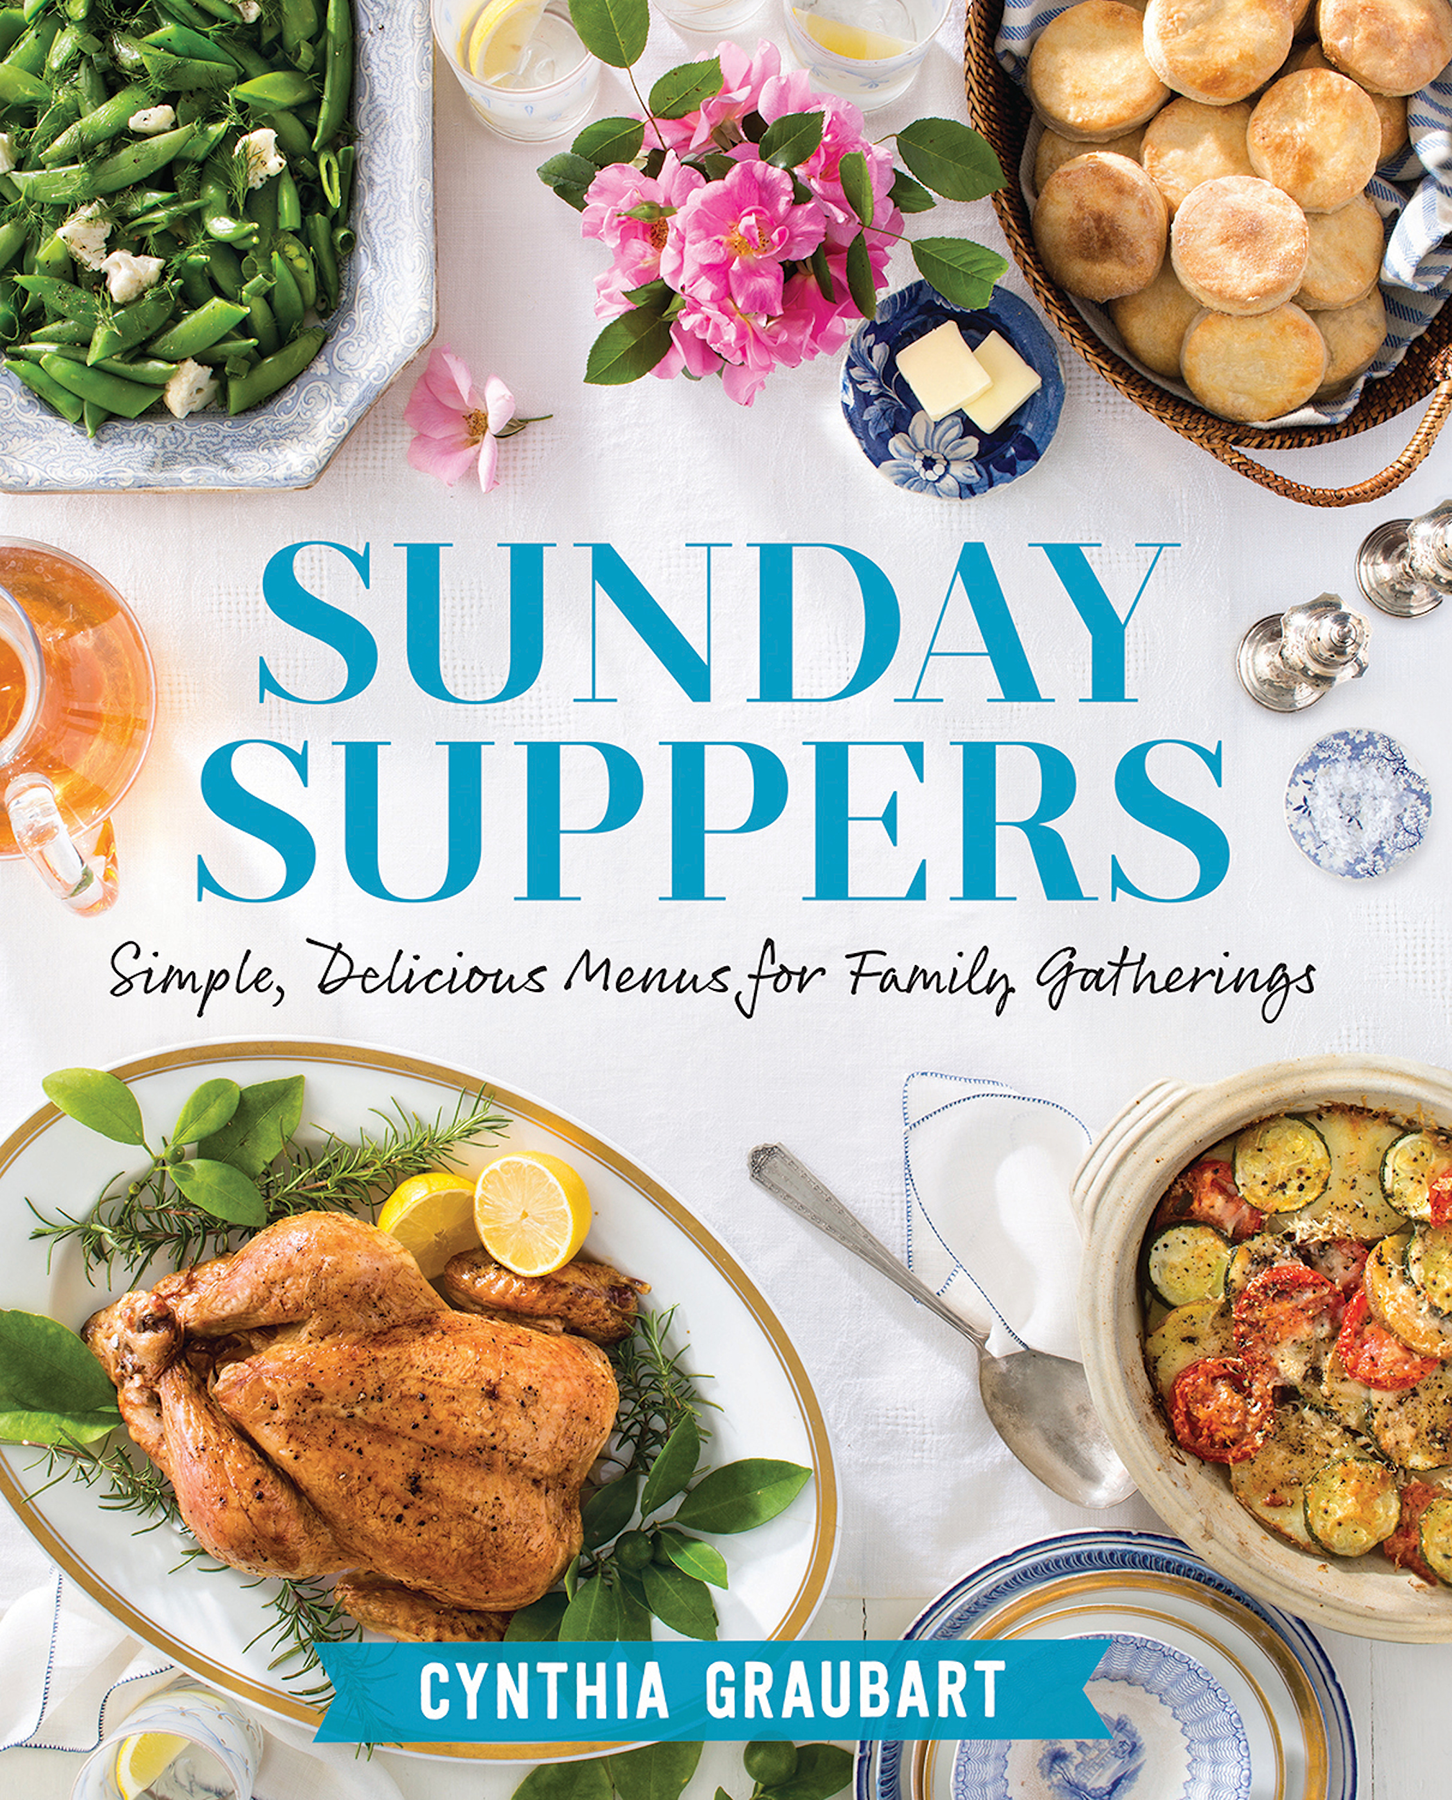 Sunday suppers simple delicious menus for family gatherings - image 1